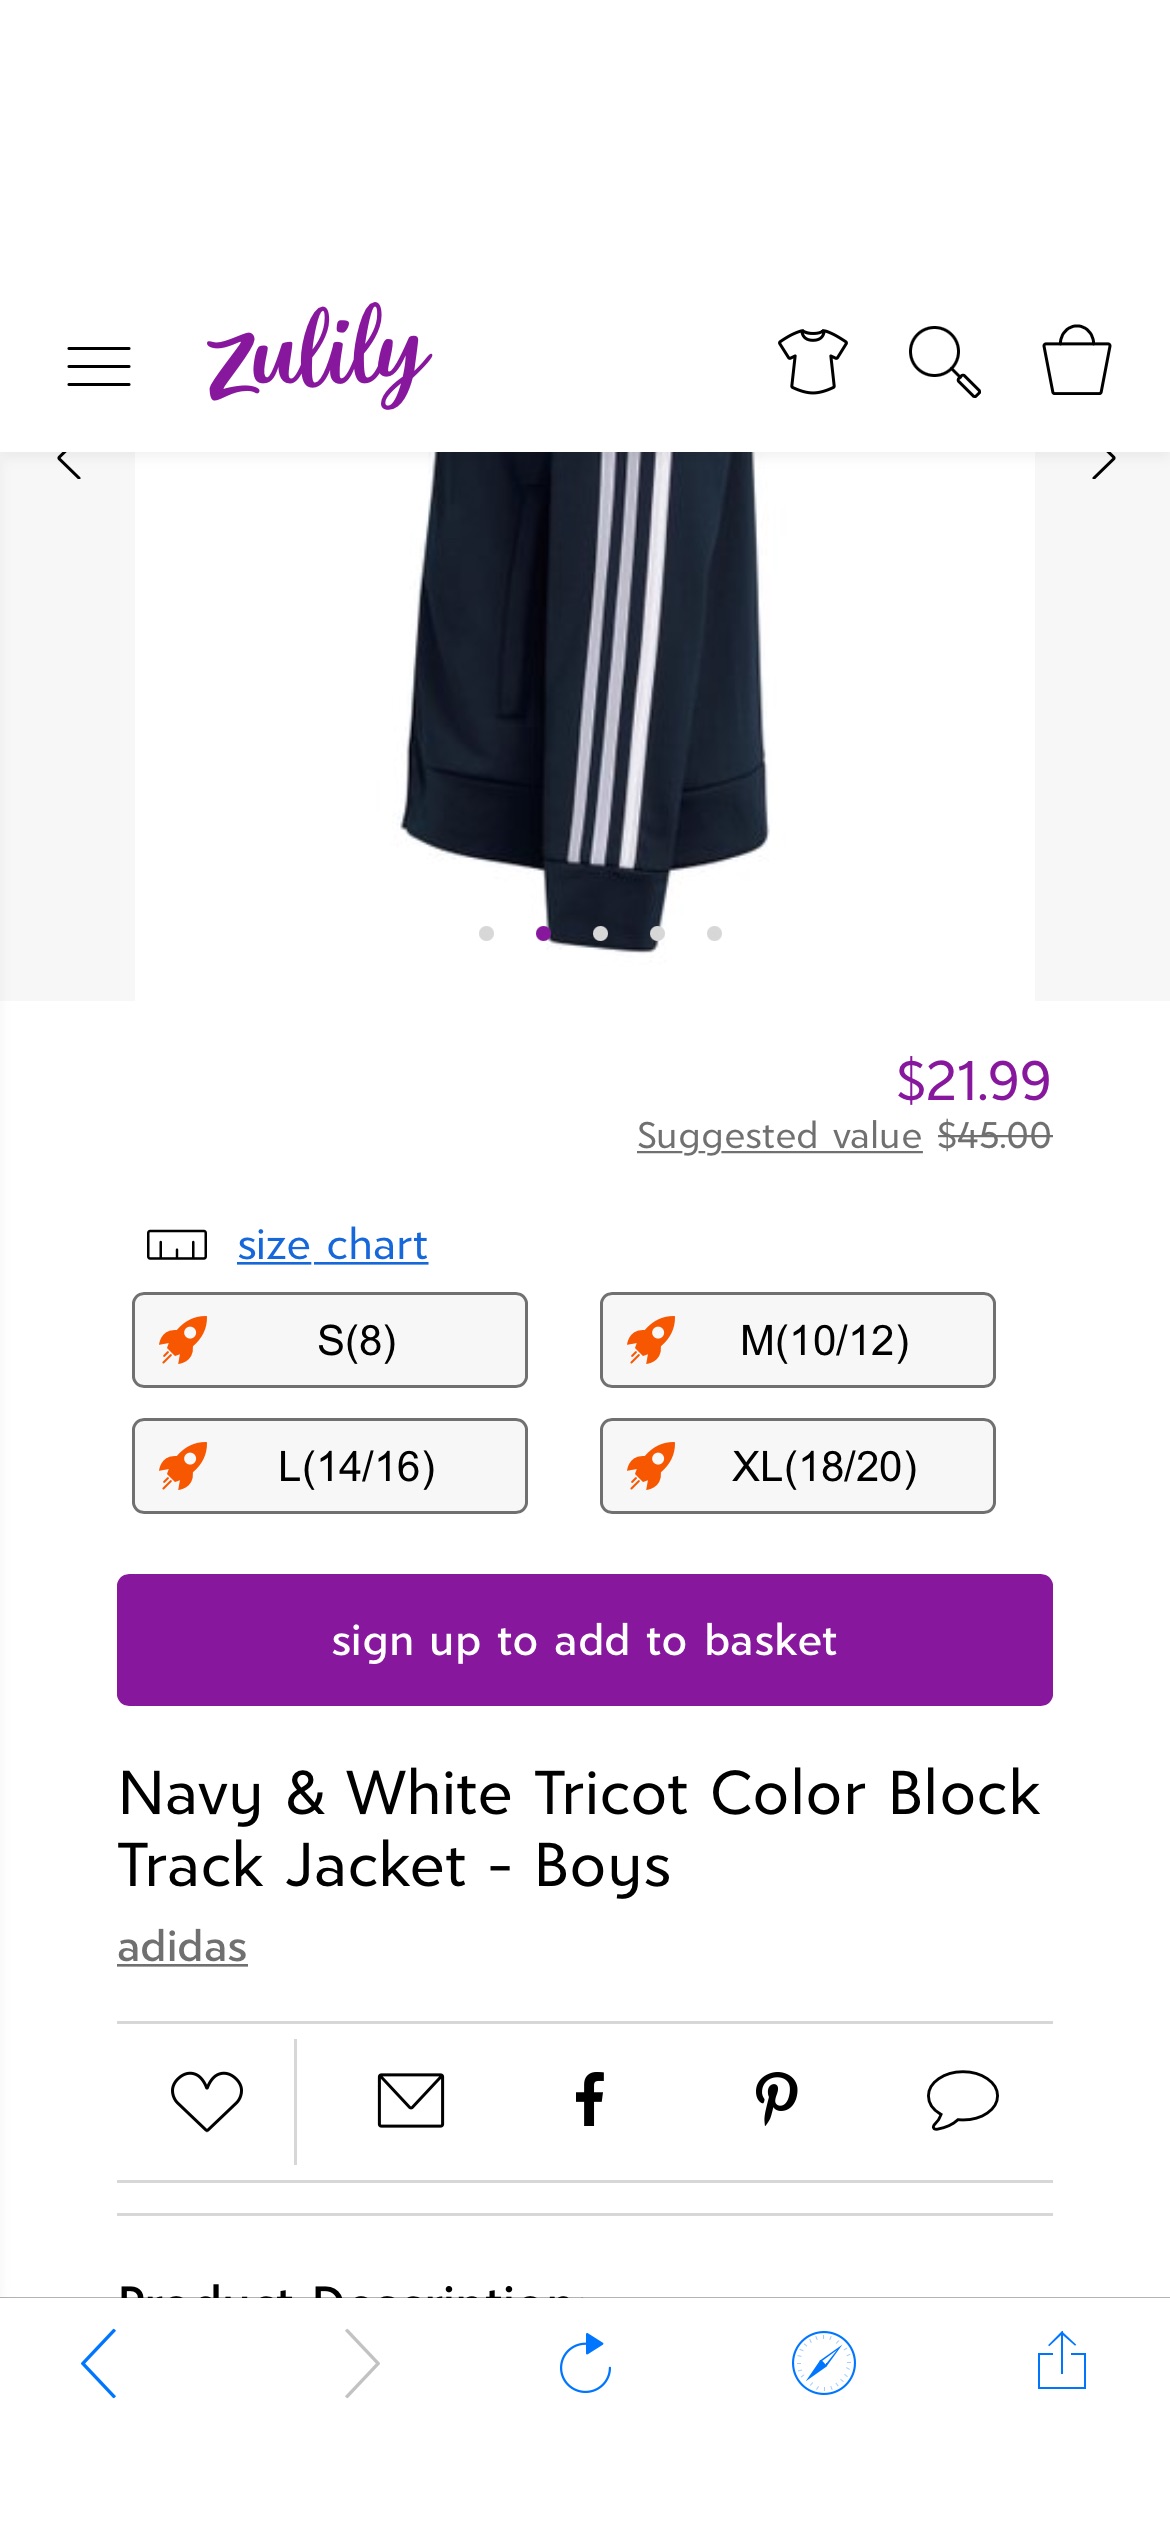 adidas Navy & White Tricot Color Block Track Jacket - Boys | Best Price and Reviews | Zulily